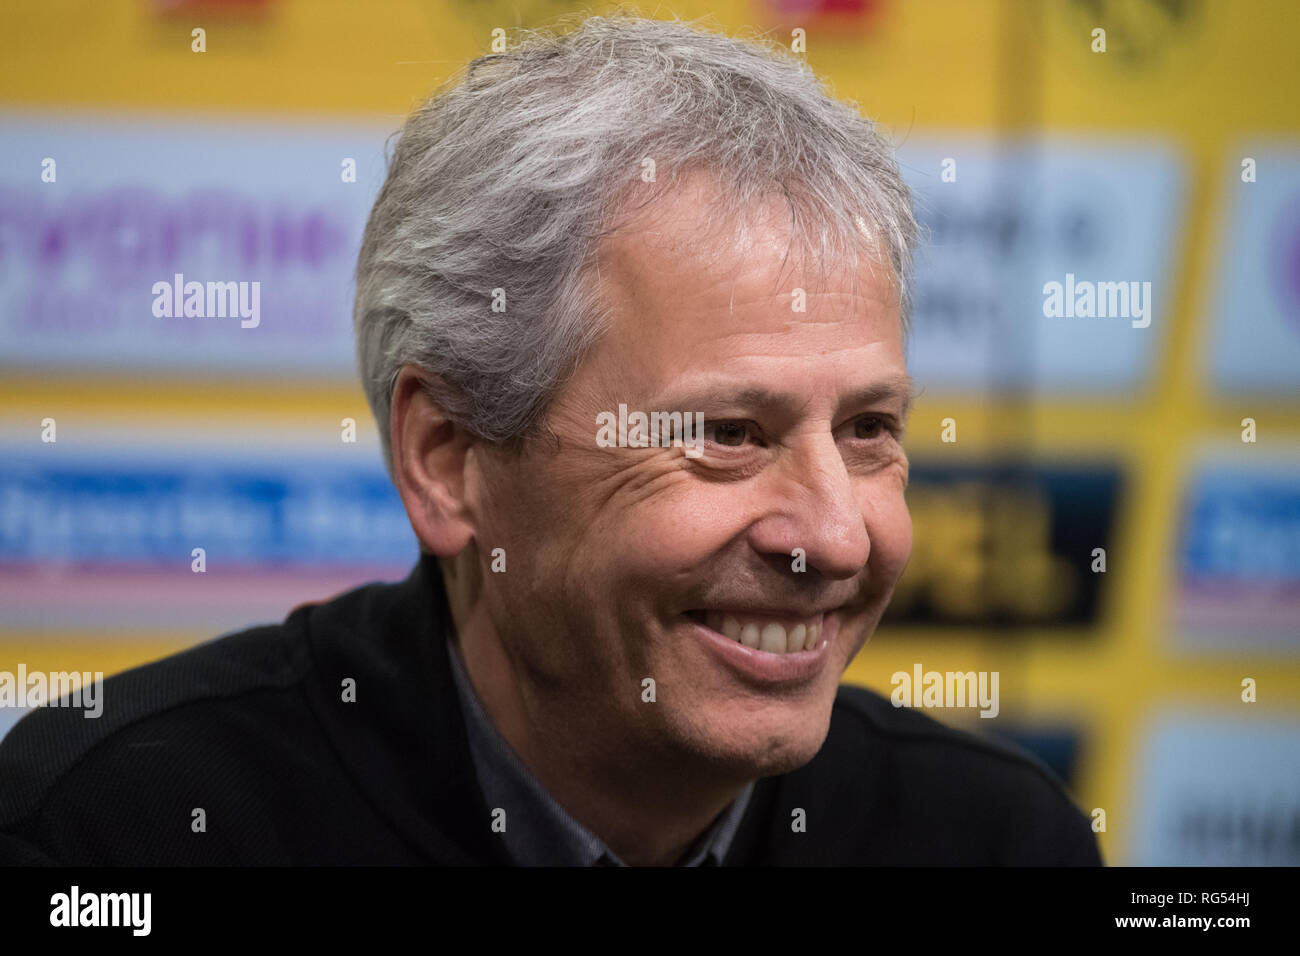 Dortmund, Deutschland. 26th Jan, 2019. Lucien FAVRE (coach, DO) laughs during the press conference, PK, after the game, laughsd, lvsschelnd, lvsscheln, lvsschelnd, laughs, facial expressions, bust, football 1st Bundesliga, 19th matchday, Borussia Dortmund (DO) - Hanover 96 H) 5: 1, on 26.01.2019 in Dortmund/Germany. ¬ | usage worldwide Credit: dpa/Alamy Live News Stock Photo